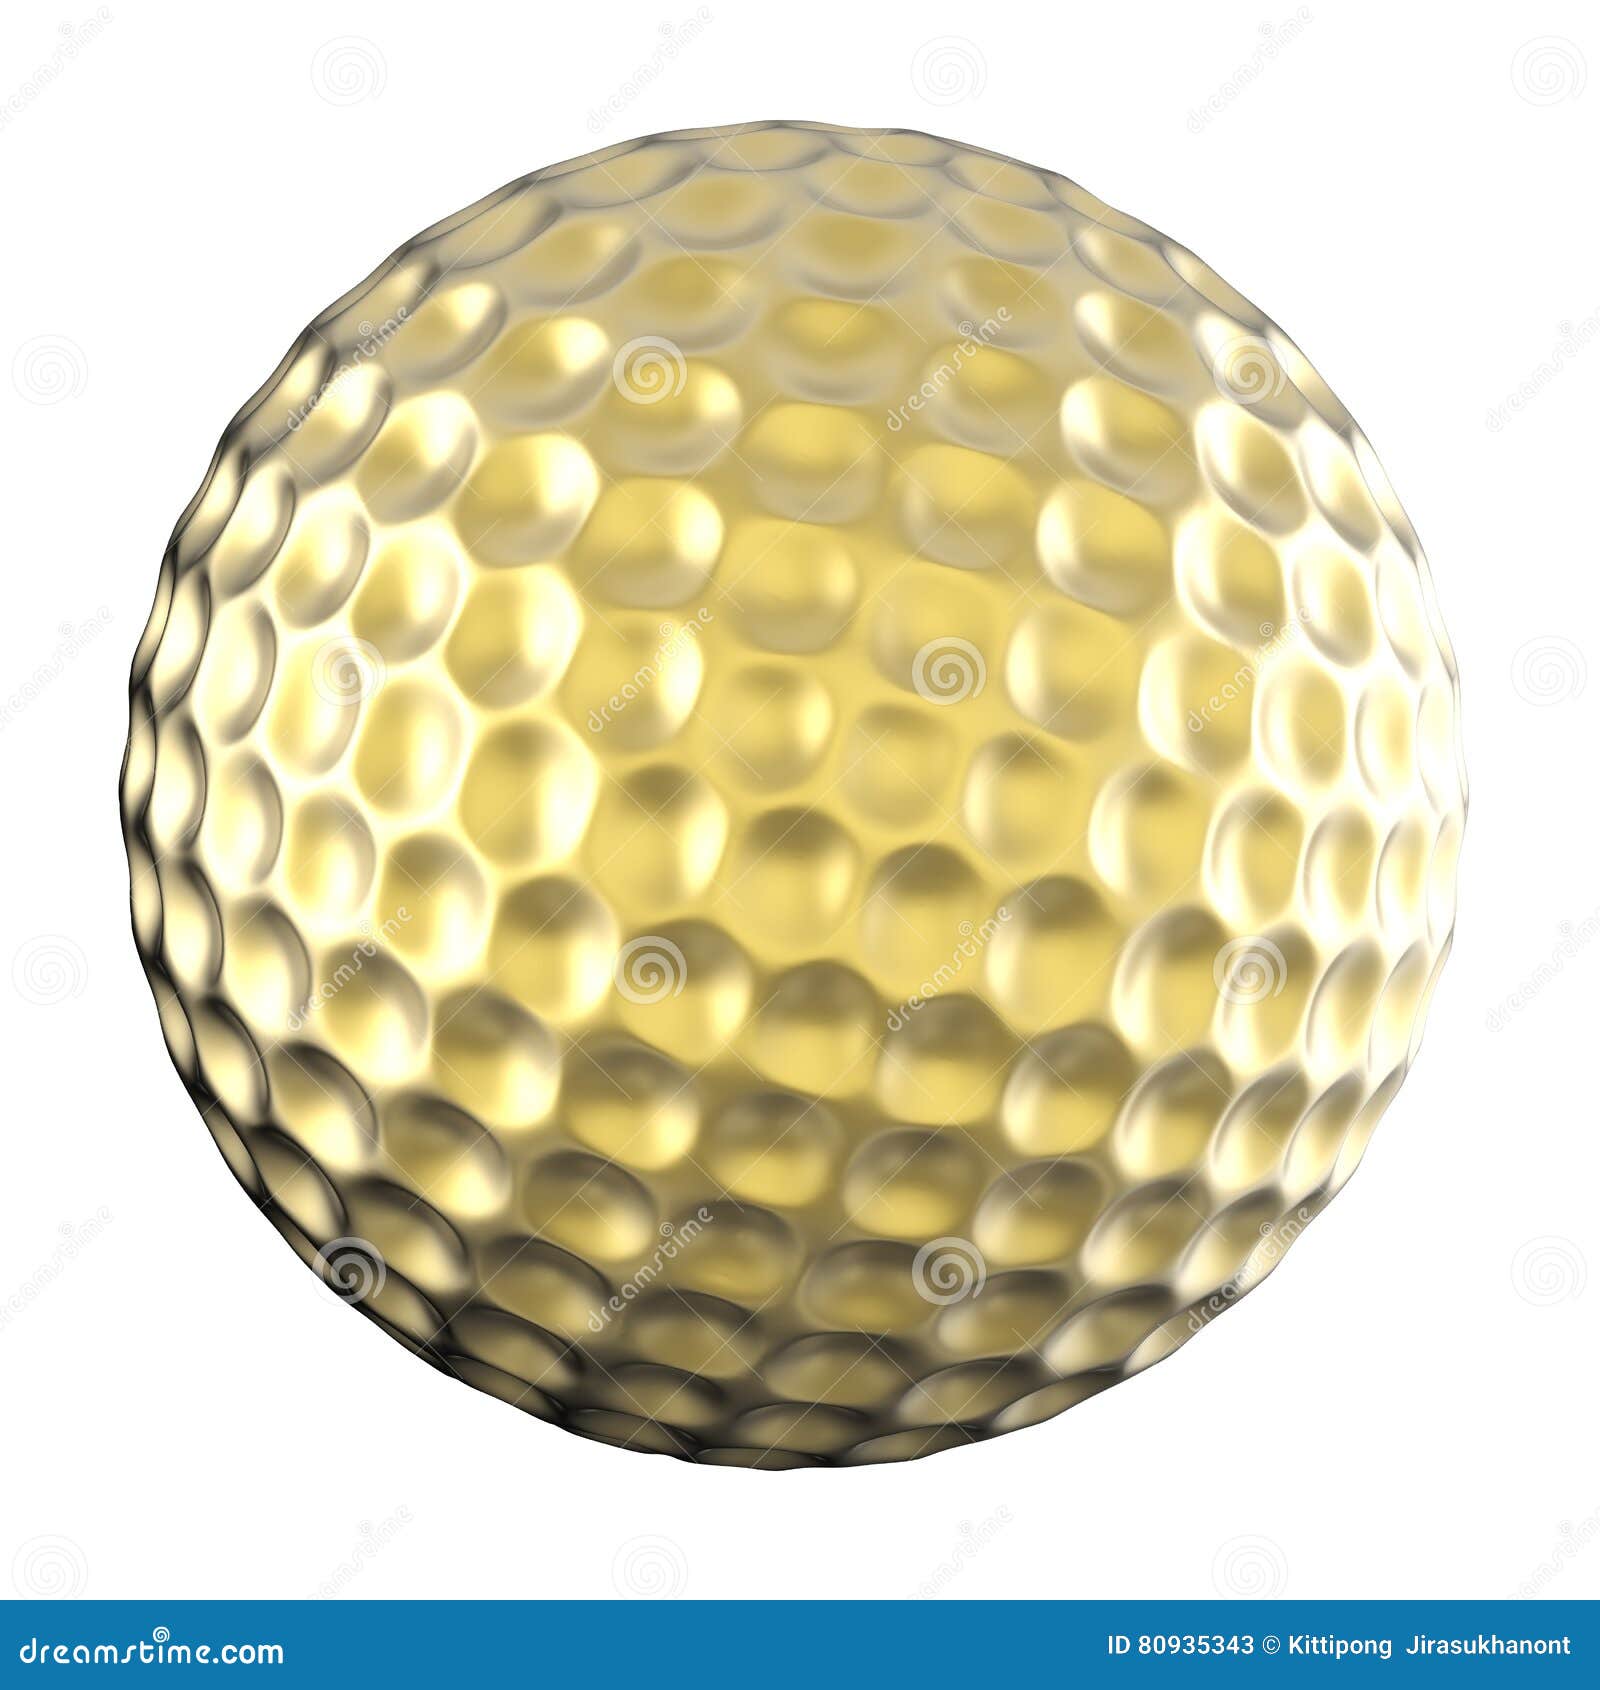 Golden Golf Ball Isolated on White Stock Image - Image of rendering ...